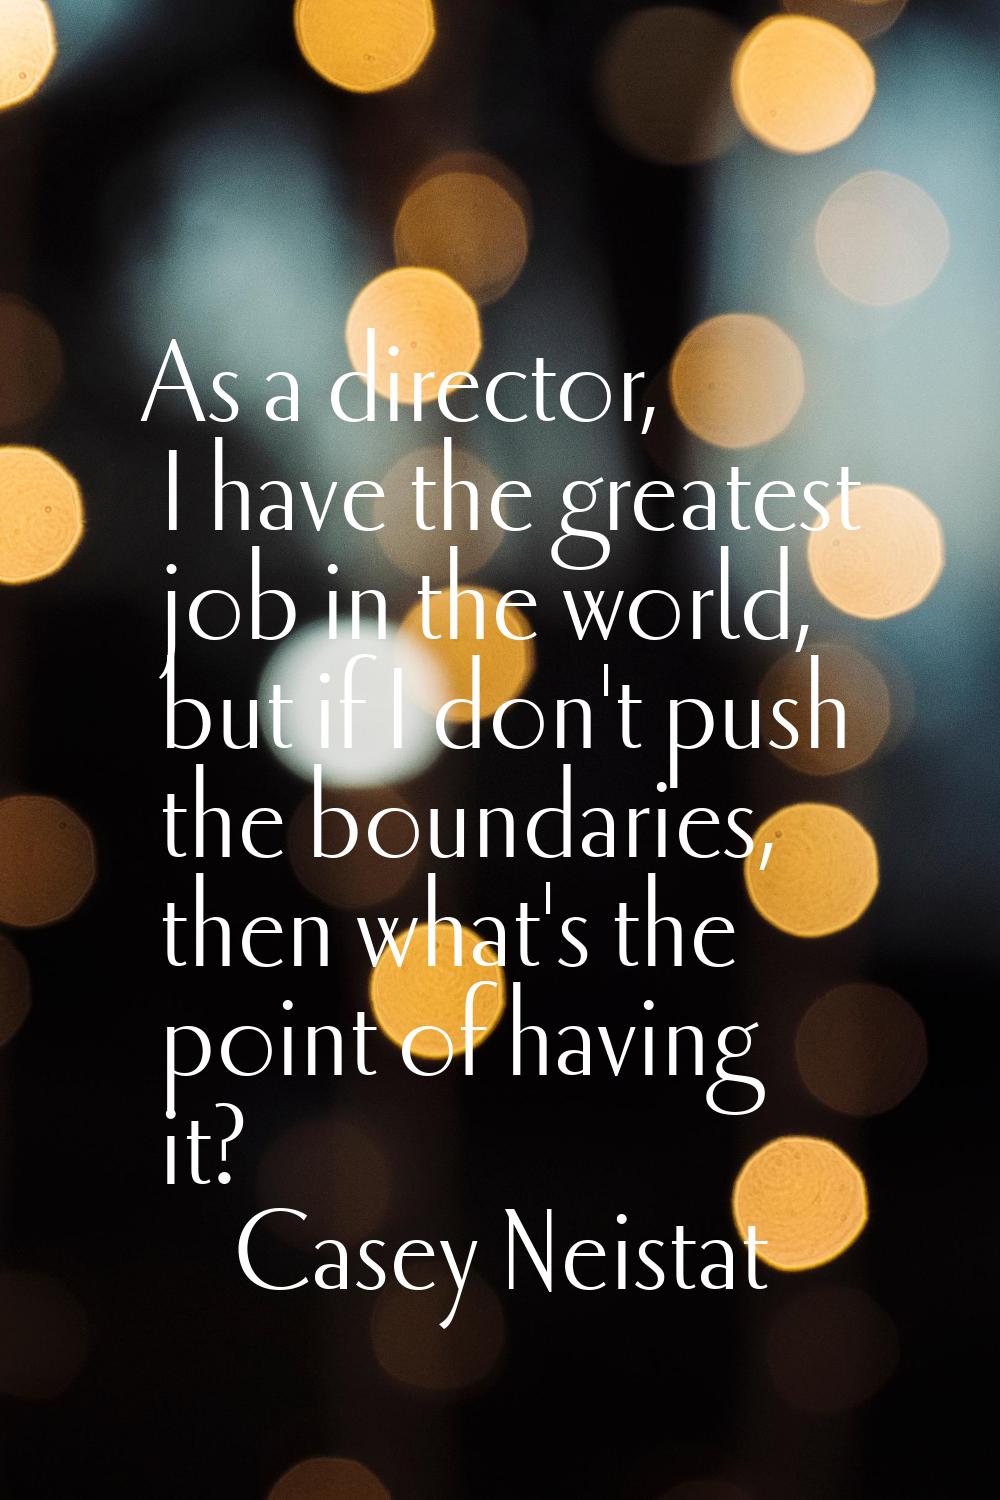 As a director, I have the greatest job in the world, but if I don't push the boundaries, then what'